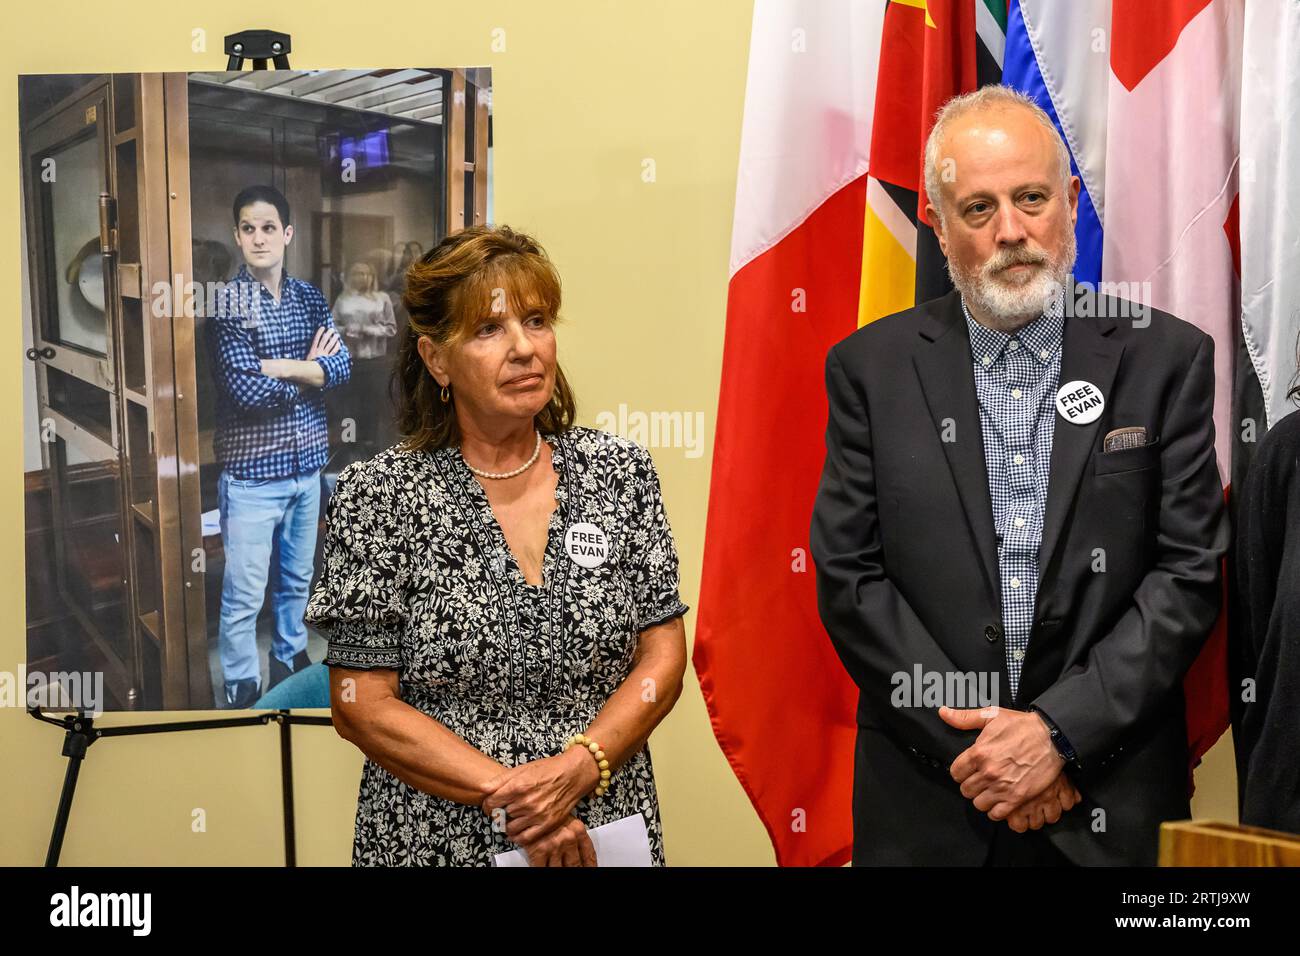 New York, USA. 13th Sep, 2023. Parents of journalist Evan Gershkovich stand by a portrait of their son and US Ambassador to the United Nations Thomas-Greenfield (not pictured) as they call for his immediate release from Russia, where he has been imprisoned since March. L-R: mother Ella Milman Gershkovich, father Mikhail Gershkovich. Credit: Enrique Shore/Alamy Live News Stock Photo